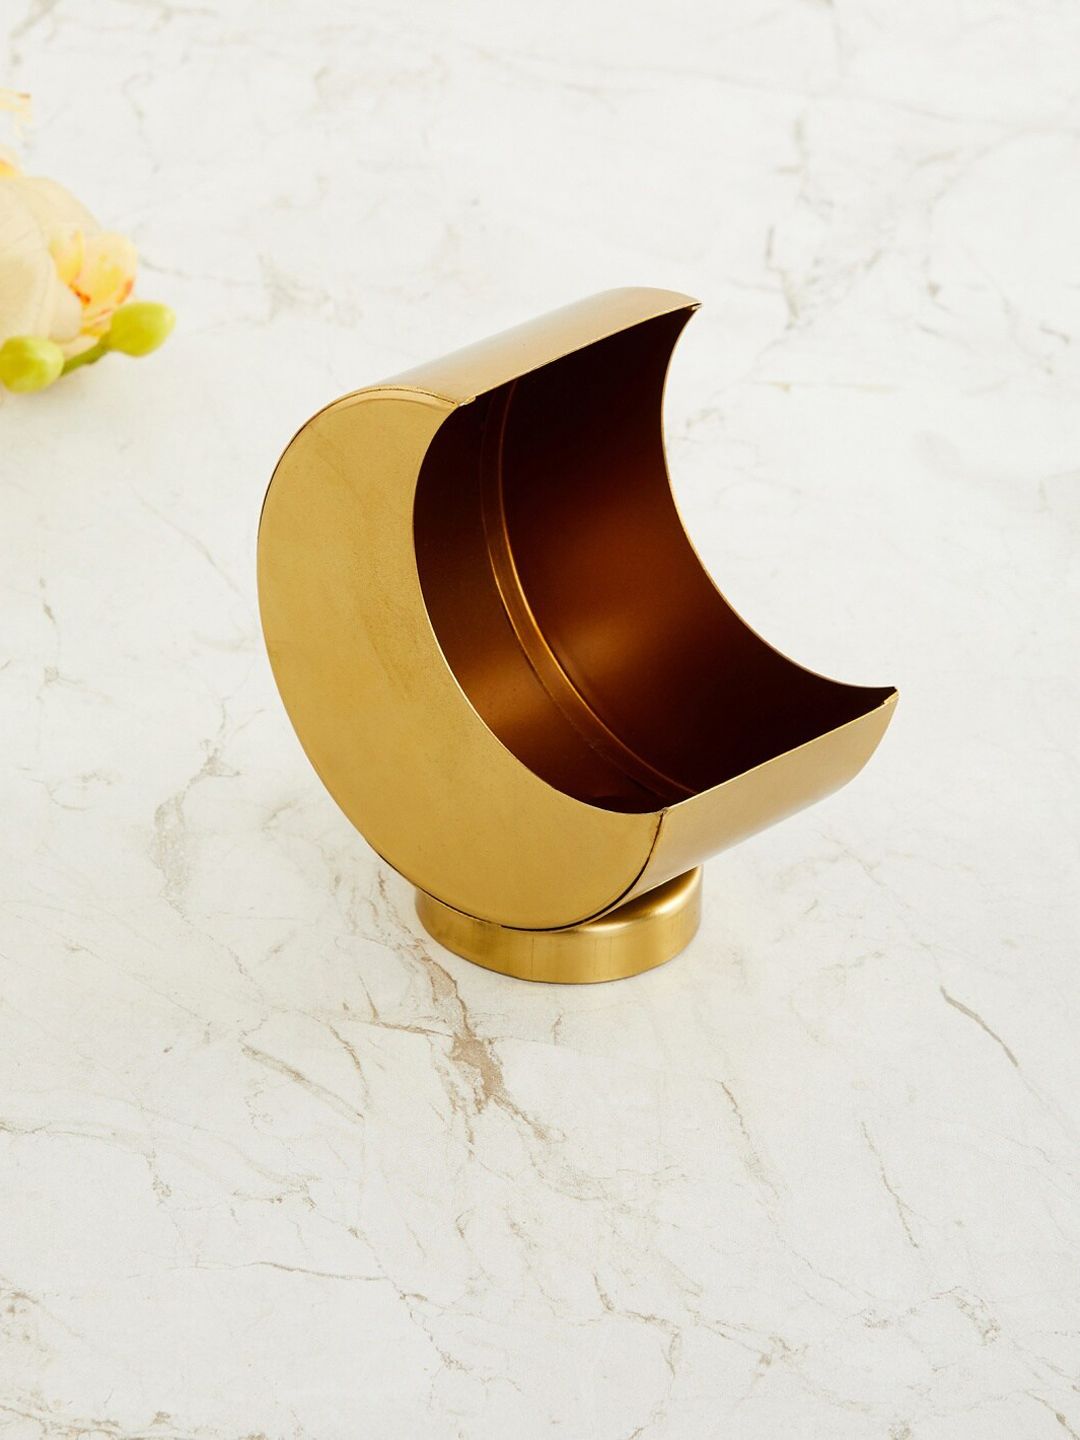 Home Centre Gold-Toned Ceramic Eternity Solid Moon-Shaped Planter Price in India